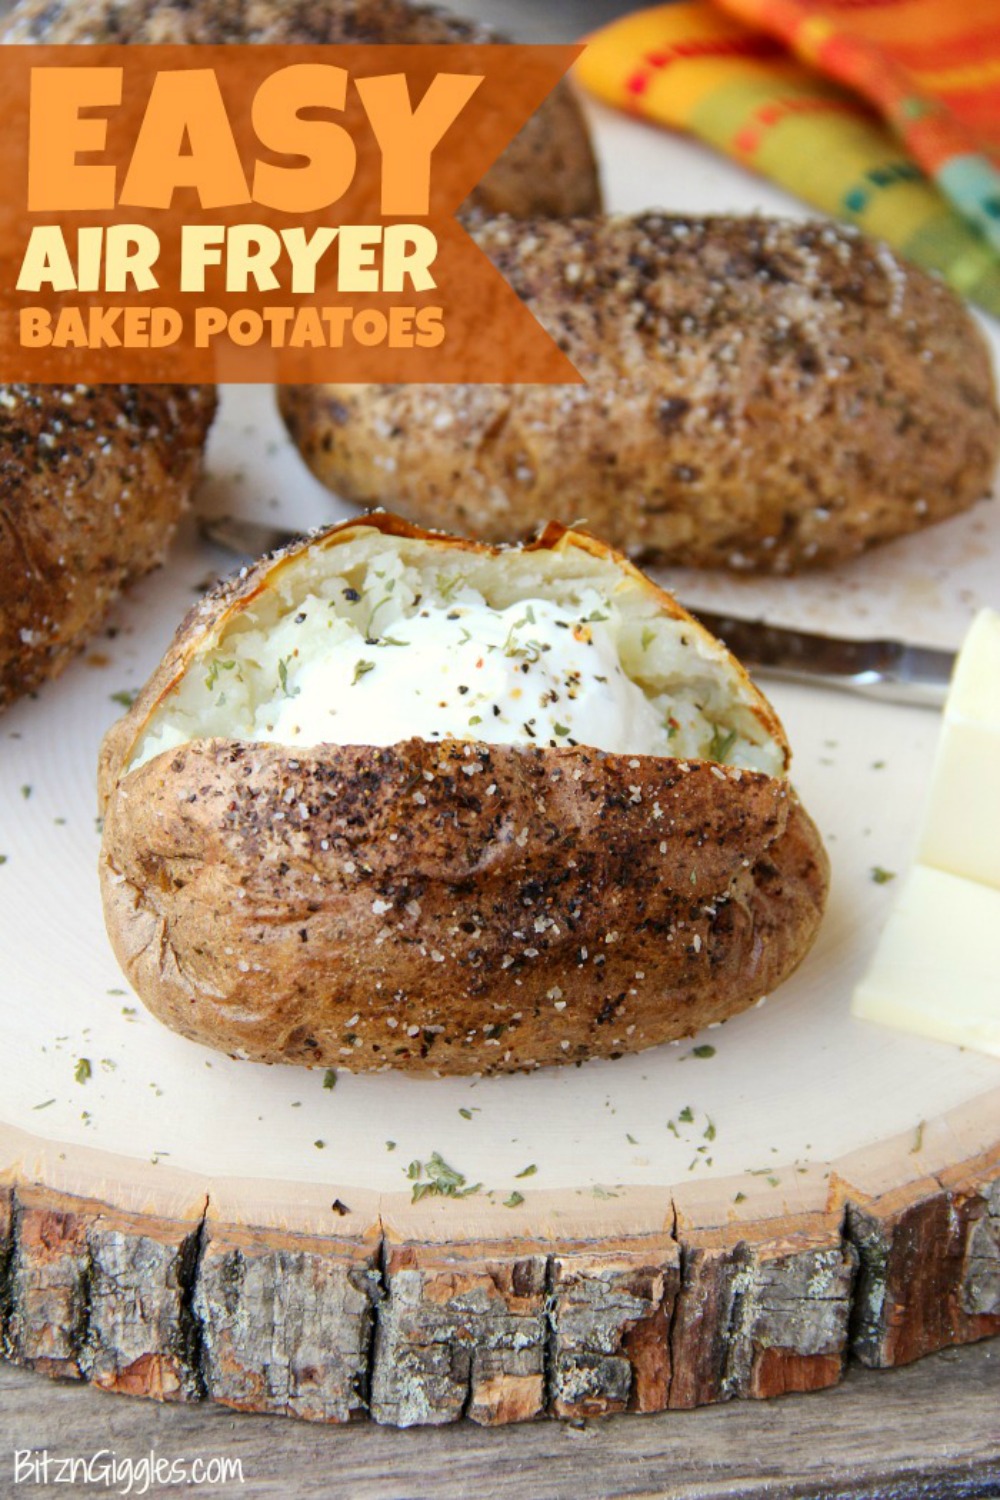 Easy Air Fryer Baked Potatoes – Tender, delicious baked potatoes with a crispy, flavorful skin. You’ll never go back to microwaving or baking in the oven again!